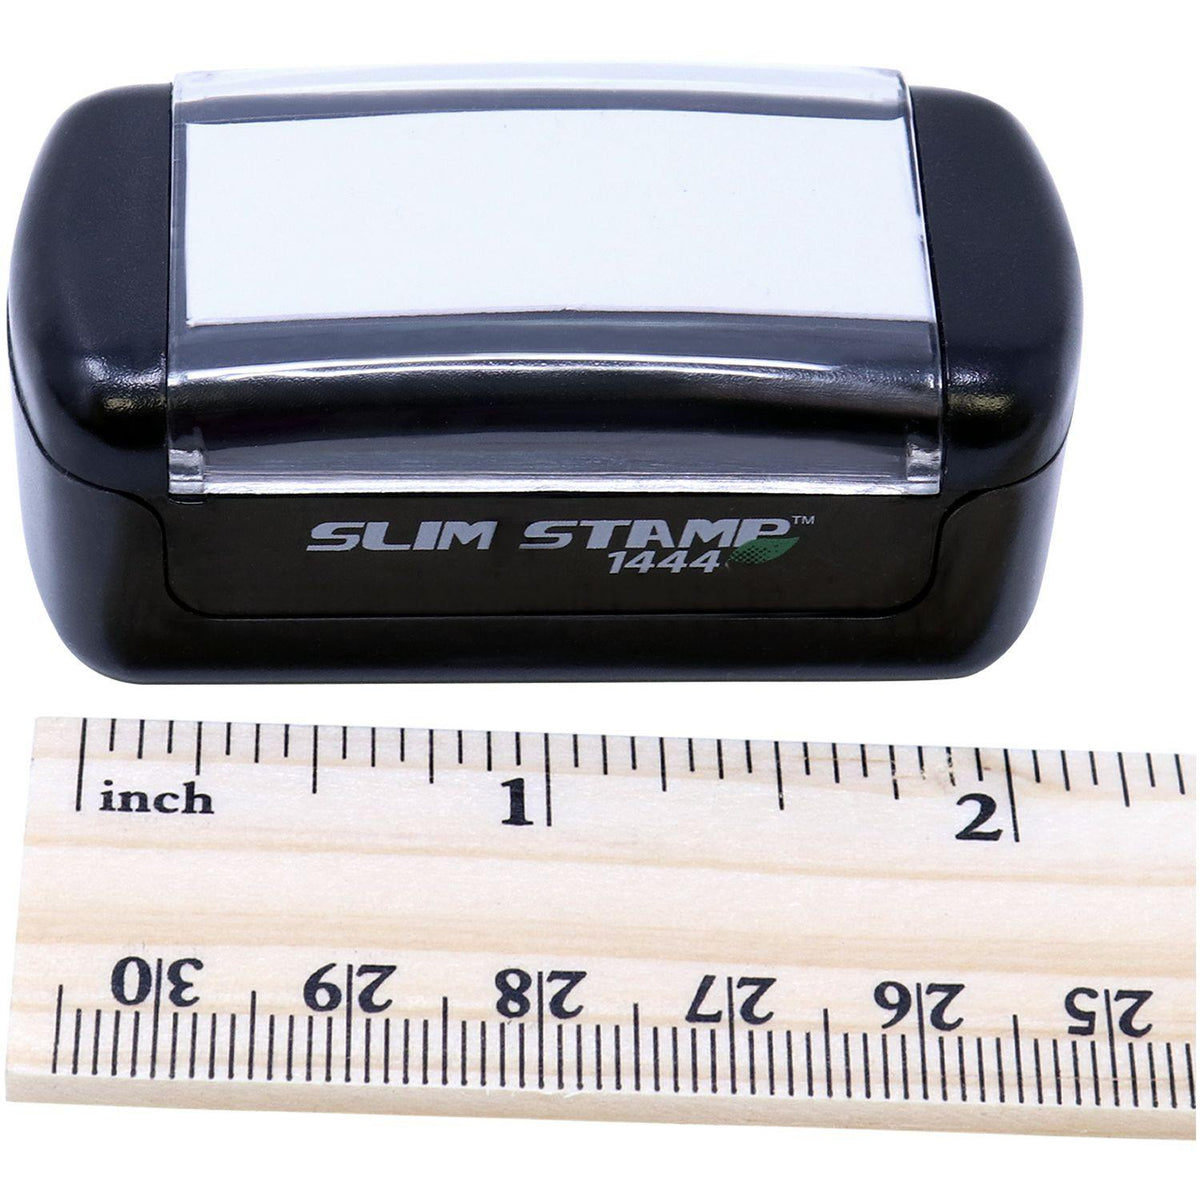 Measurement Slim Pre-Inked For Official Use Only Stamp with Ruler